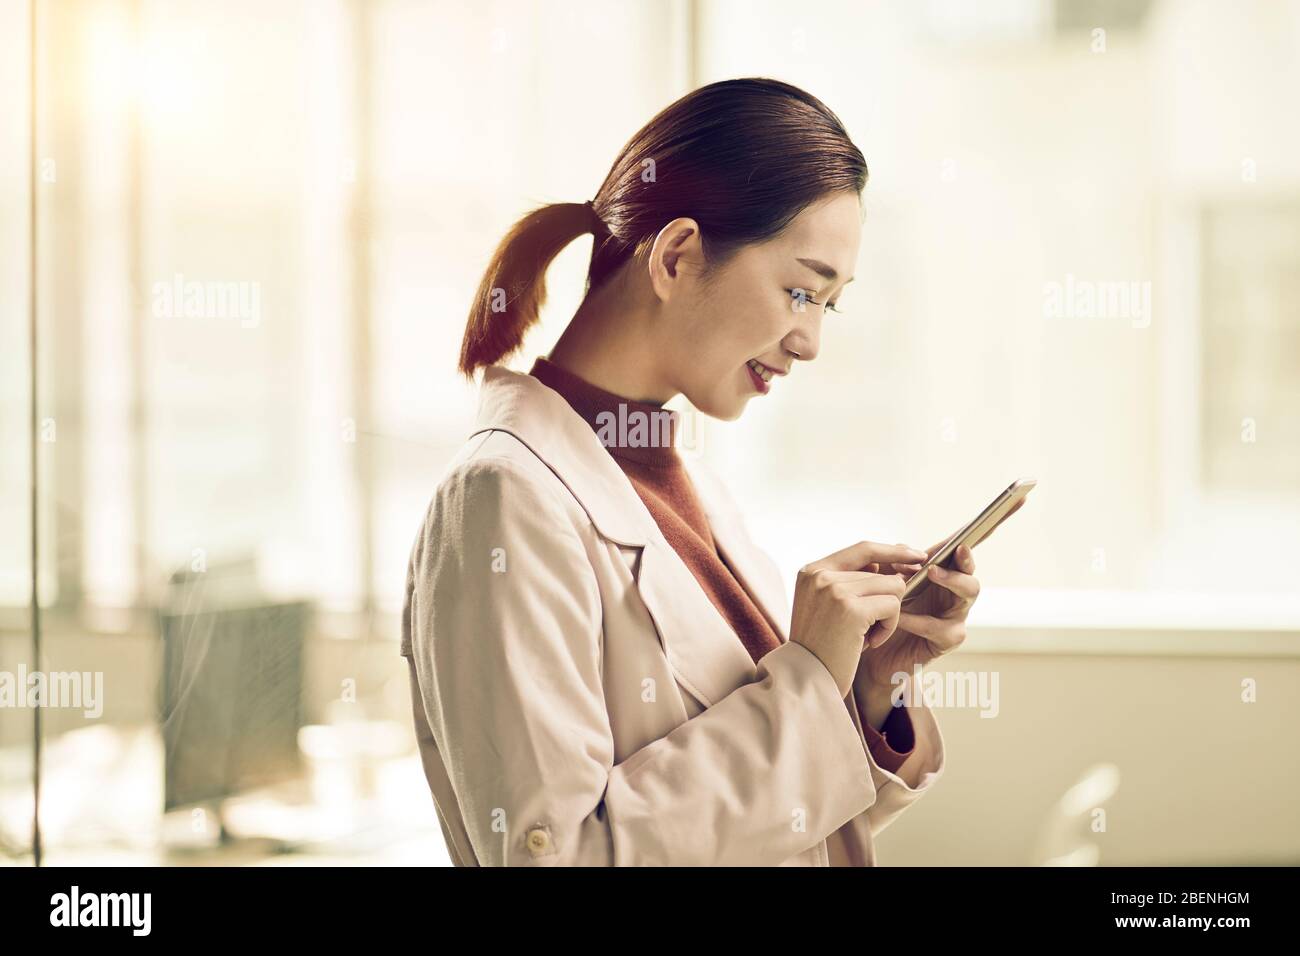 young asian business woman entrepreneur checking or sending text messages using mobile phone Stock Photo